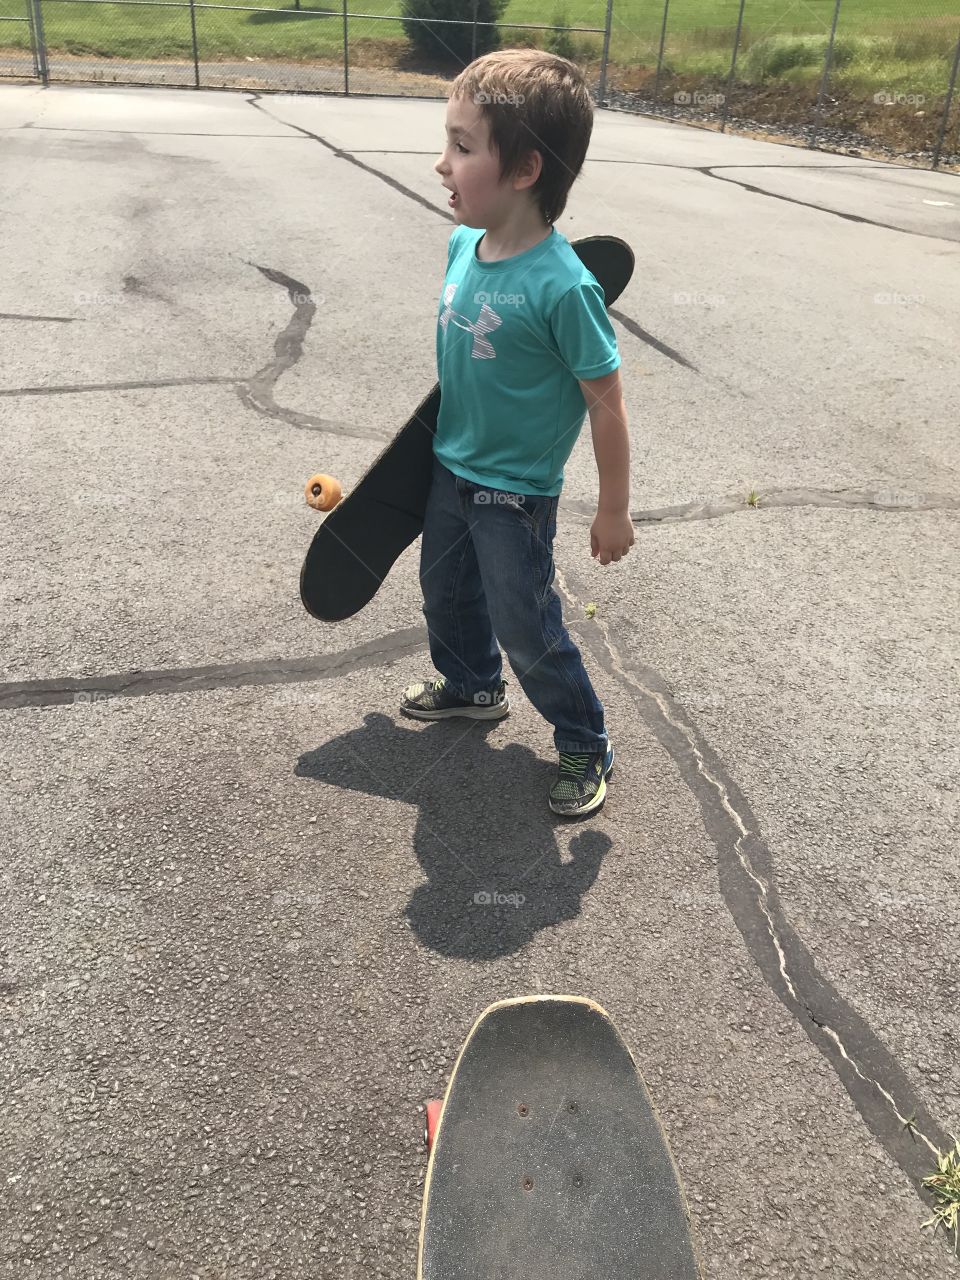 A boy and his board